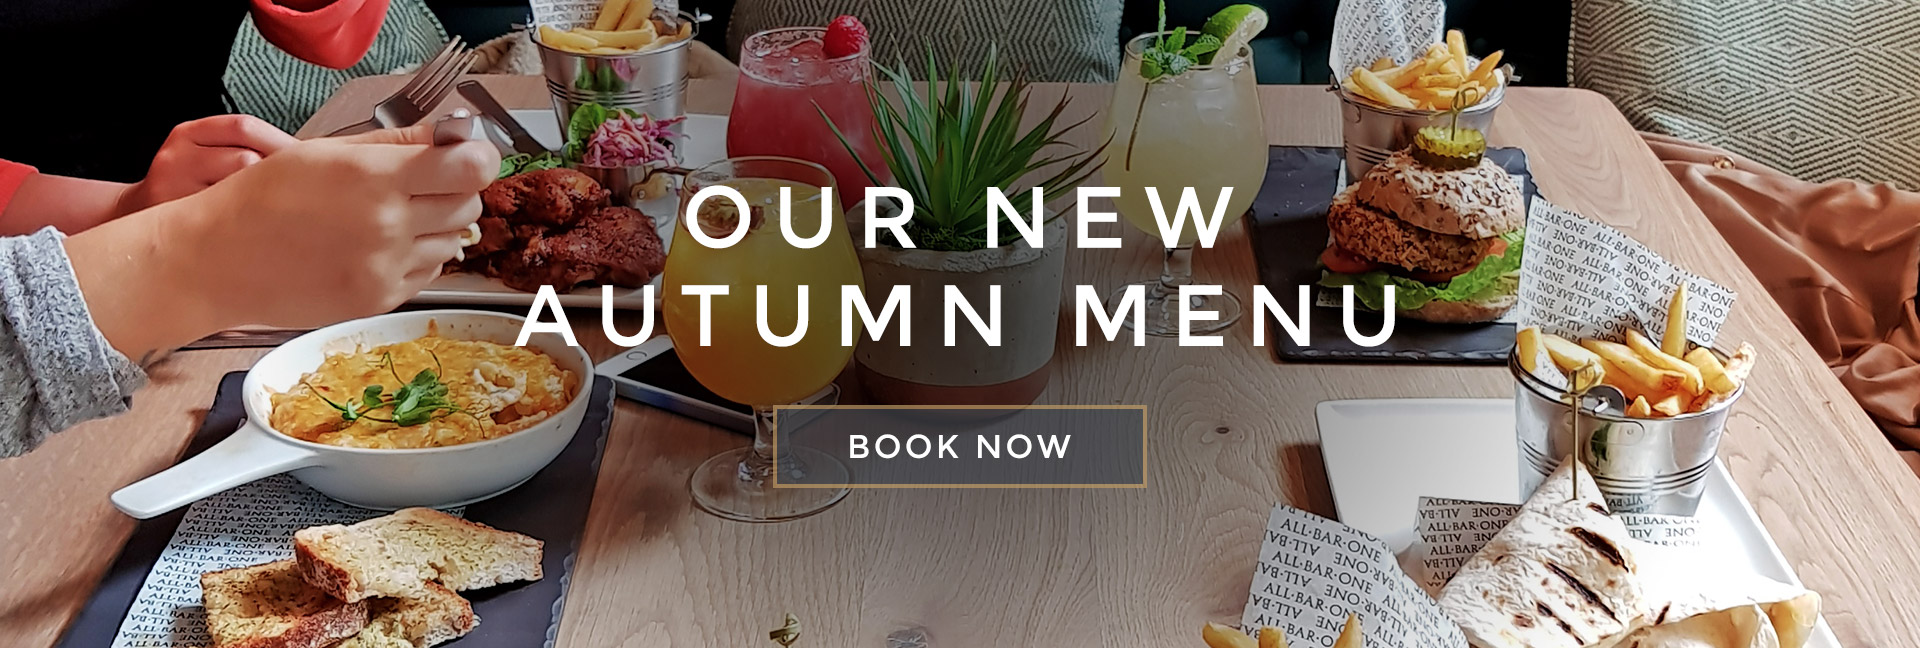 Our new Autumn menu at All Bar One Cambridge - Book now